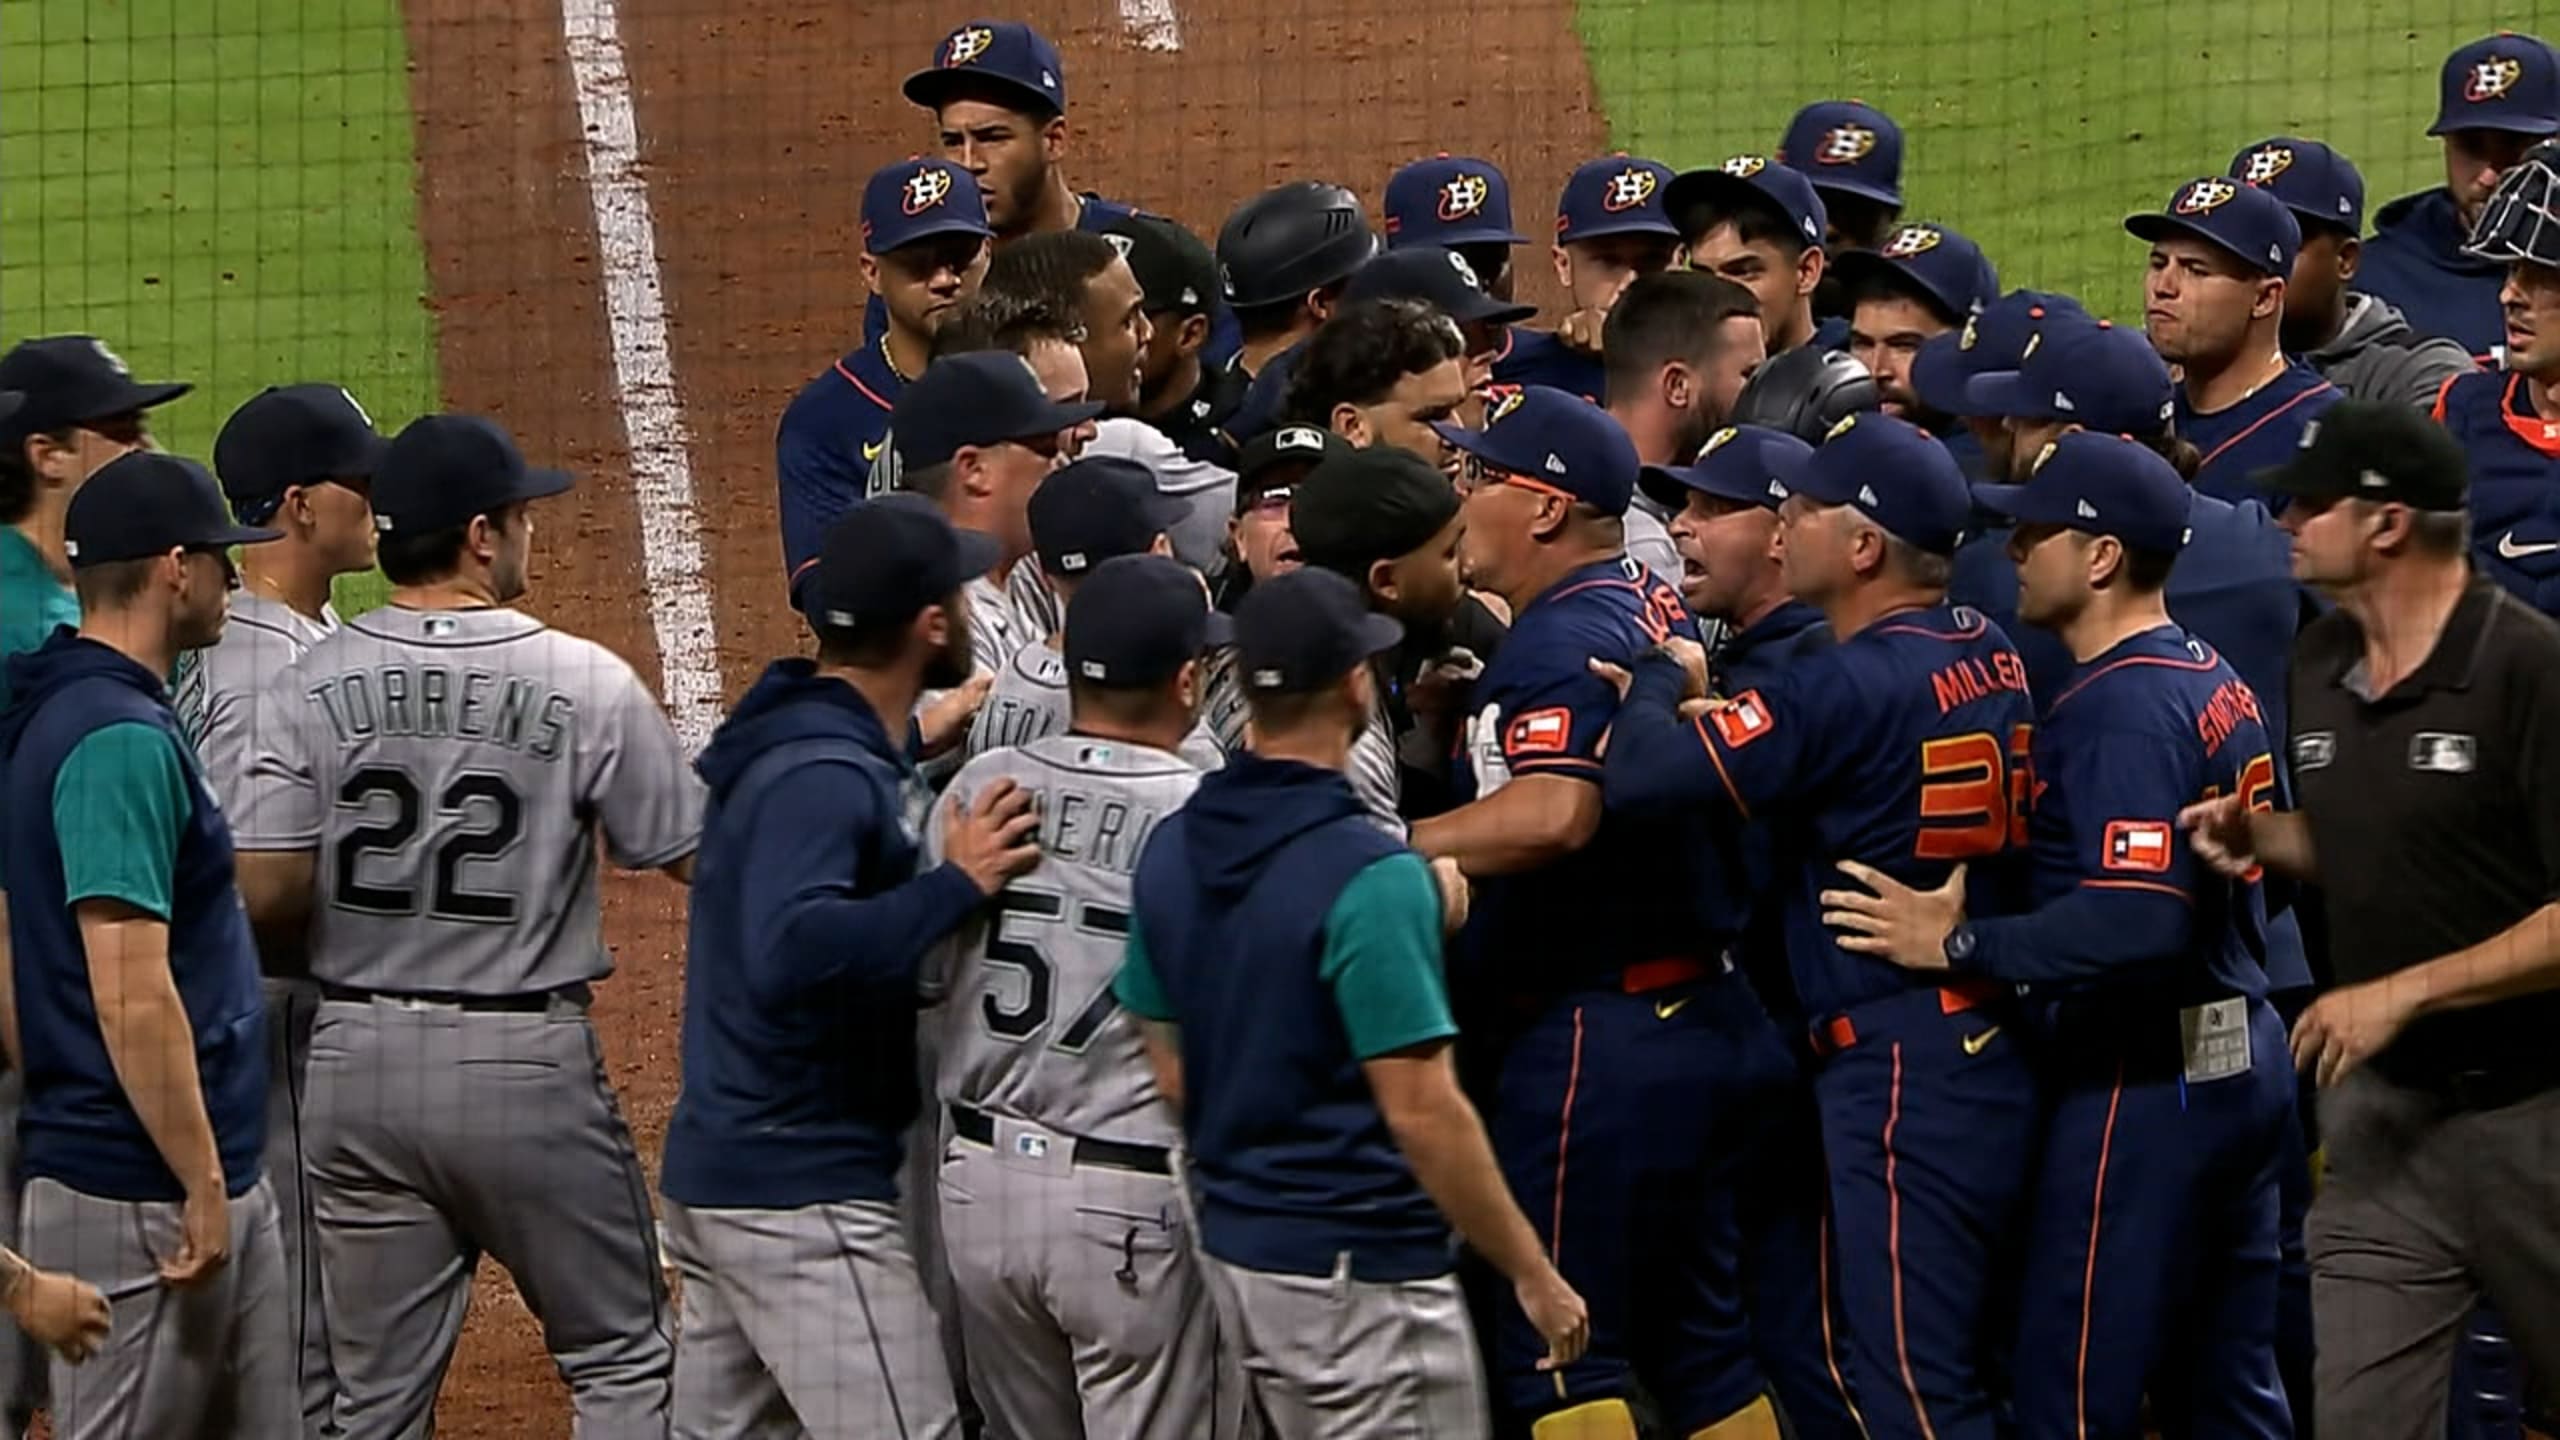 Seattle Mariners Scott Servais: Seattle Mariners fans infuriated by Scott  Servais claiming team was as good as the Rangers and Astros - This is the  problem with this regime